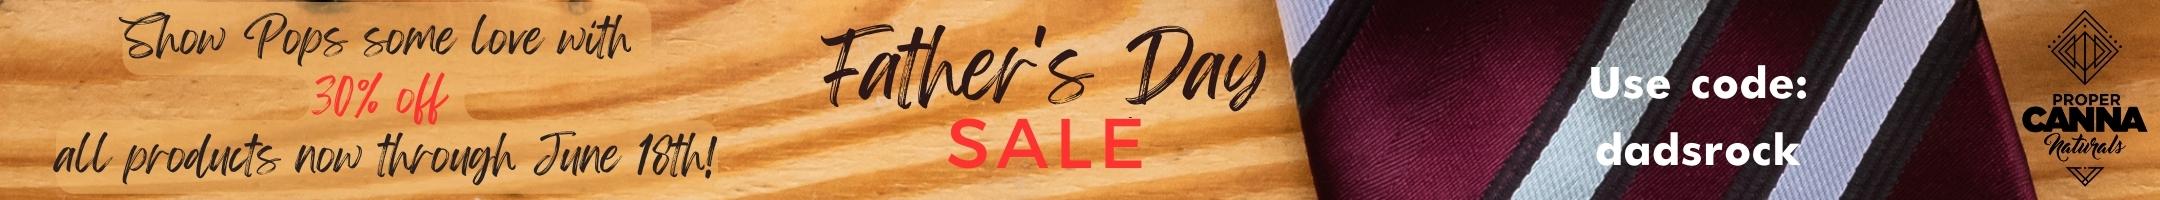 Fathers Day promo banner